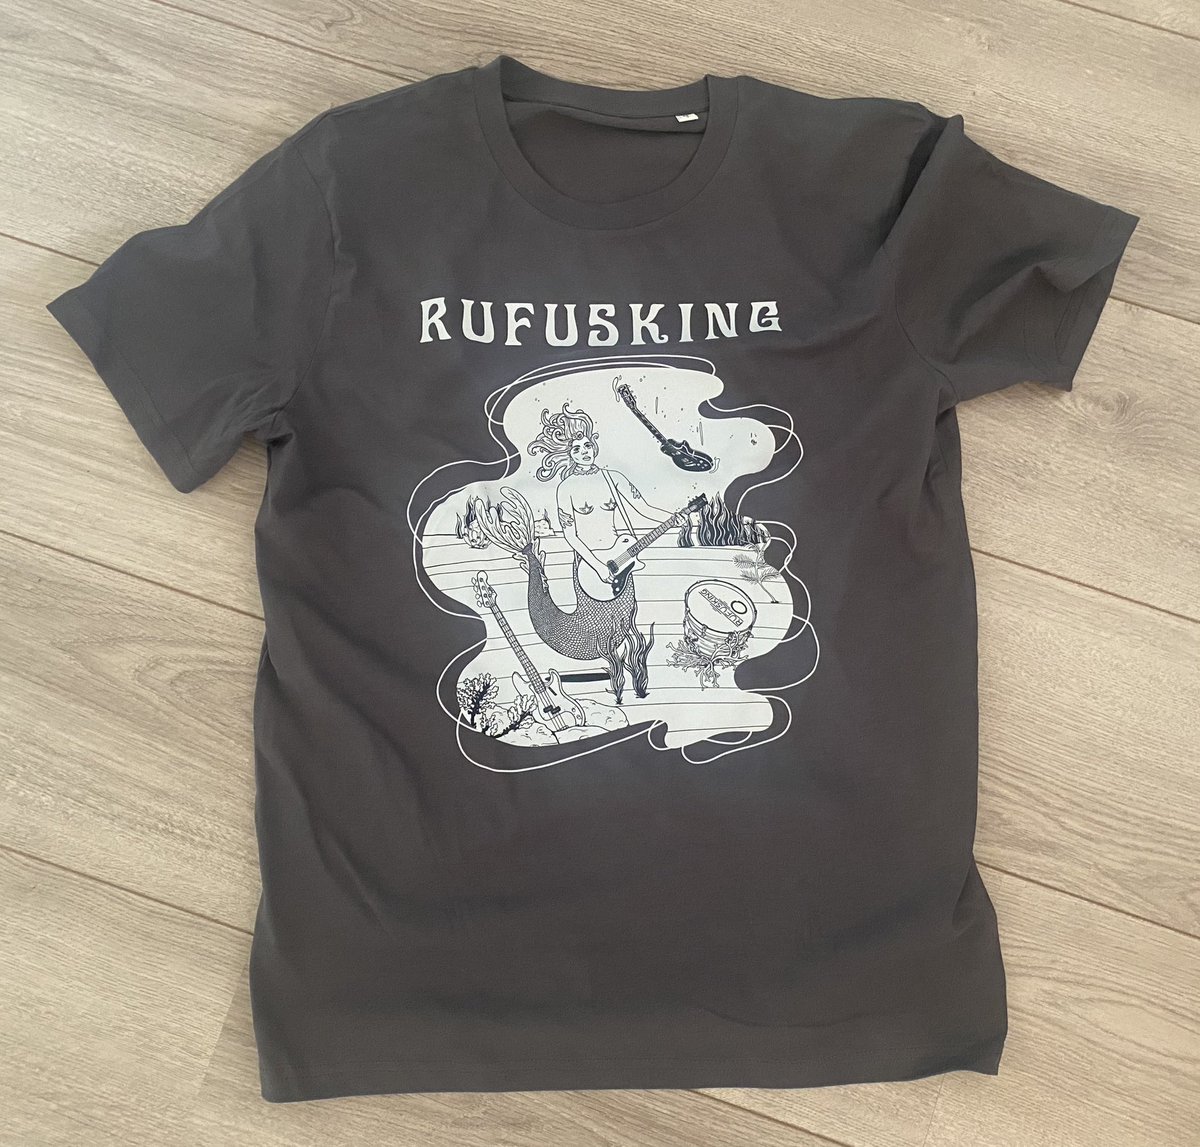 Rufusking 5 Years | Very limited edition ‘Mermaid T-shirt’ available on our Bandcamp! Check it out: rufusking.bandcamp.com/merch/rufuskin… Design: Puck Hofwegen #merch #tshirt @Bandcamp @CruelHorizon @ITHERETWEETER1 @dorner_martina @cooltop20 @RadioTfsc @dizzypandamusic @Pablo_Rocksey_M